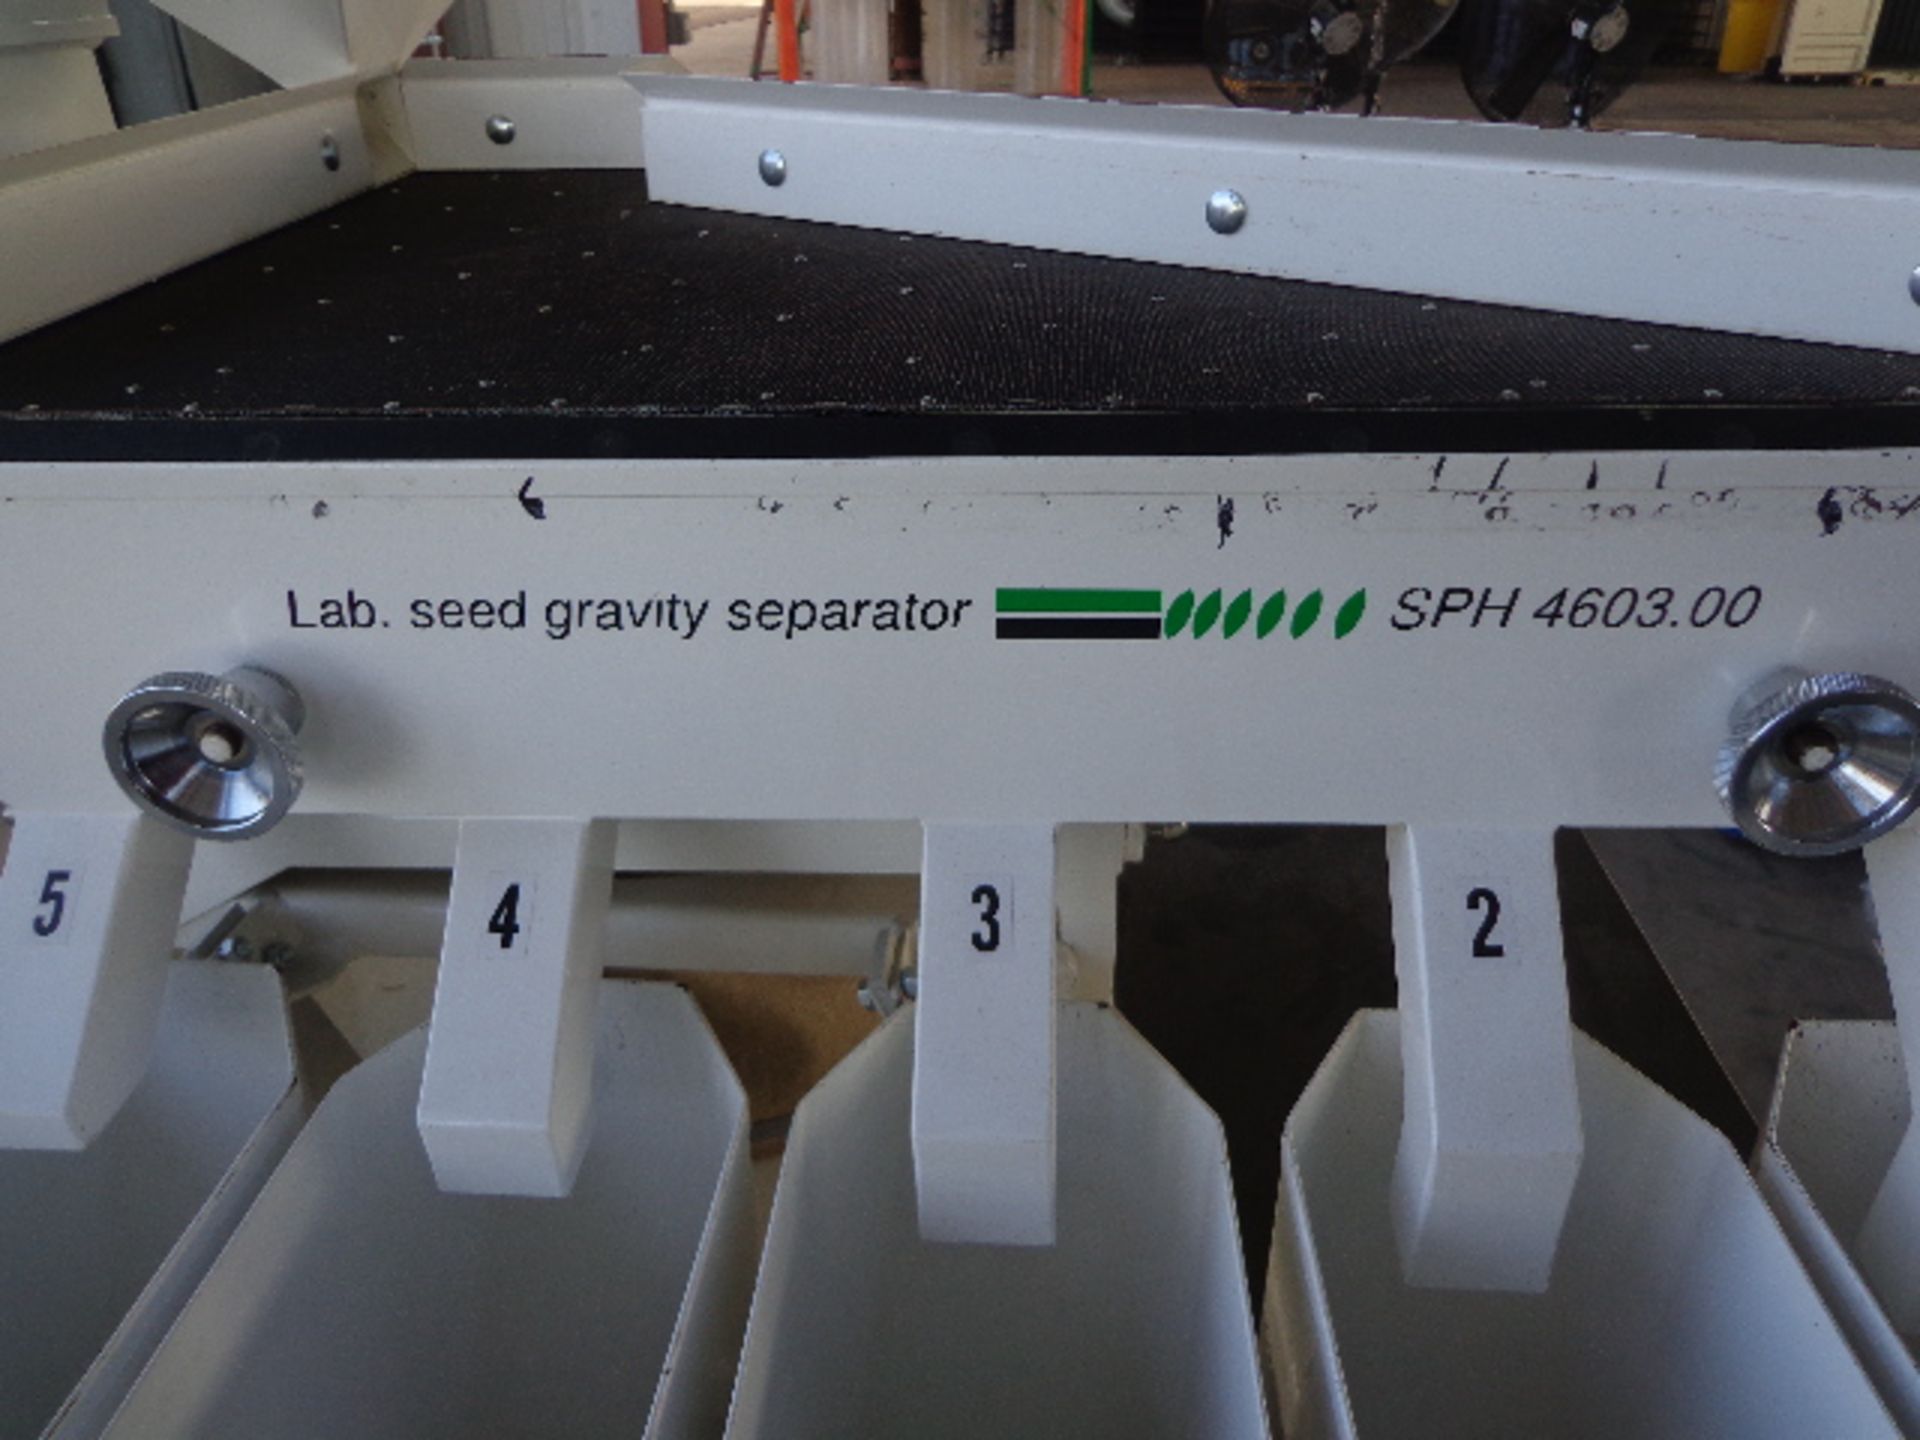 HOLLAND LAB SEED GRAVITY SEPARATOR MDL. SPH. 4603.00 SN. 34264 - Image 3 of 5